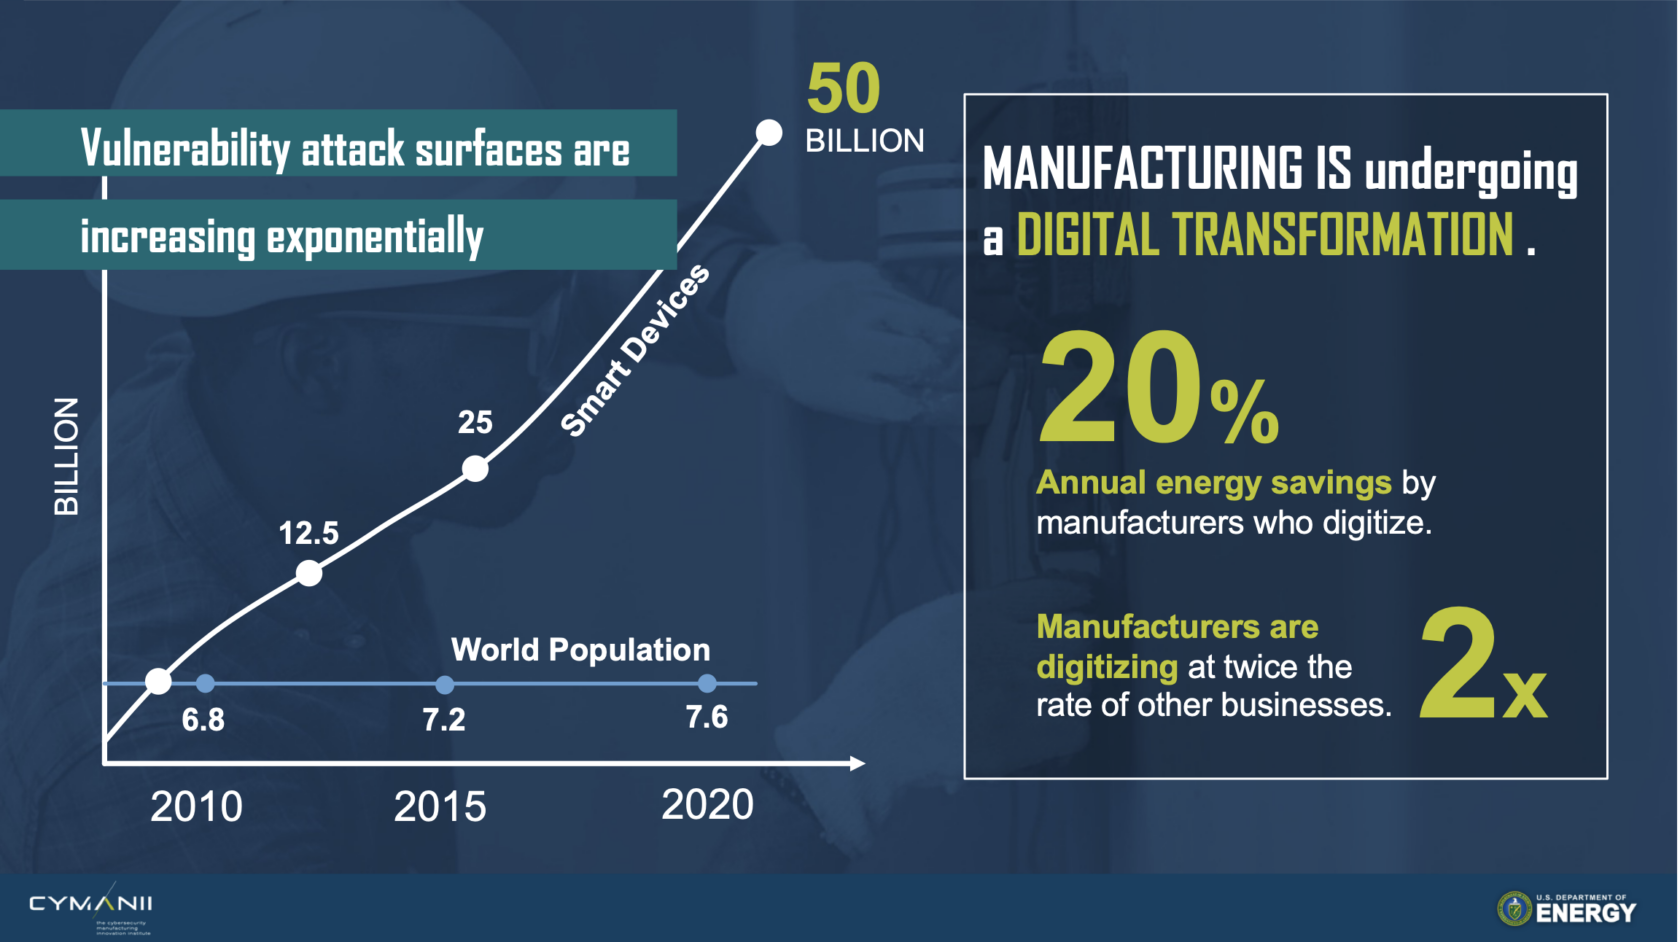 Manufacturing is undergoing a digital transformation